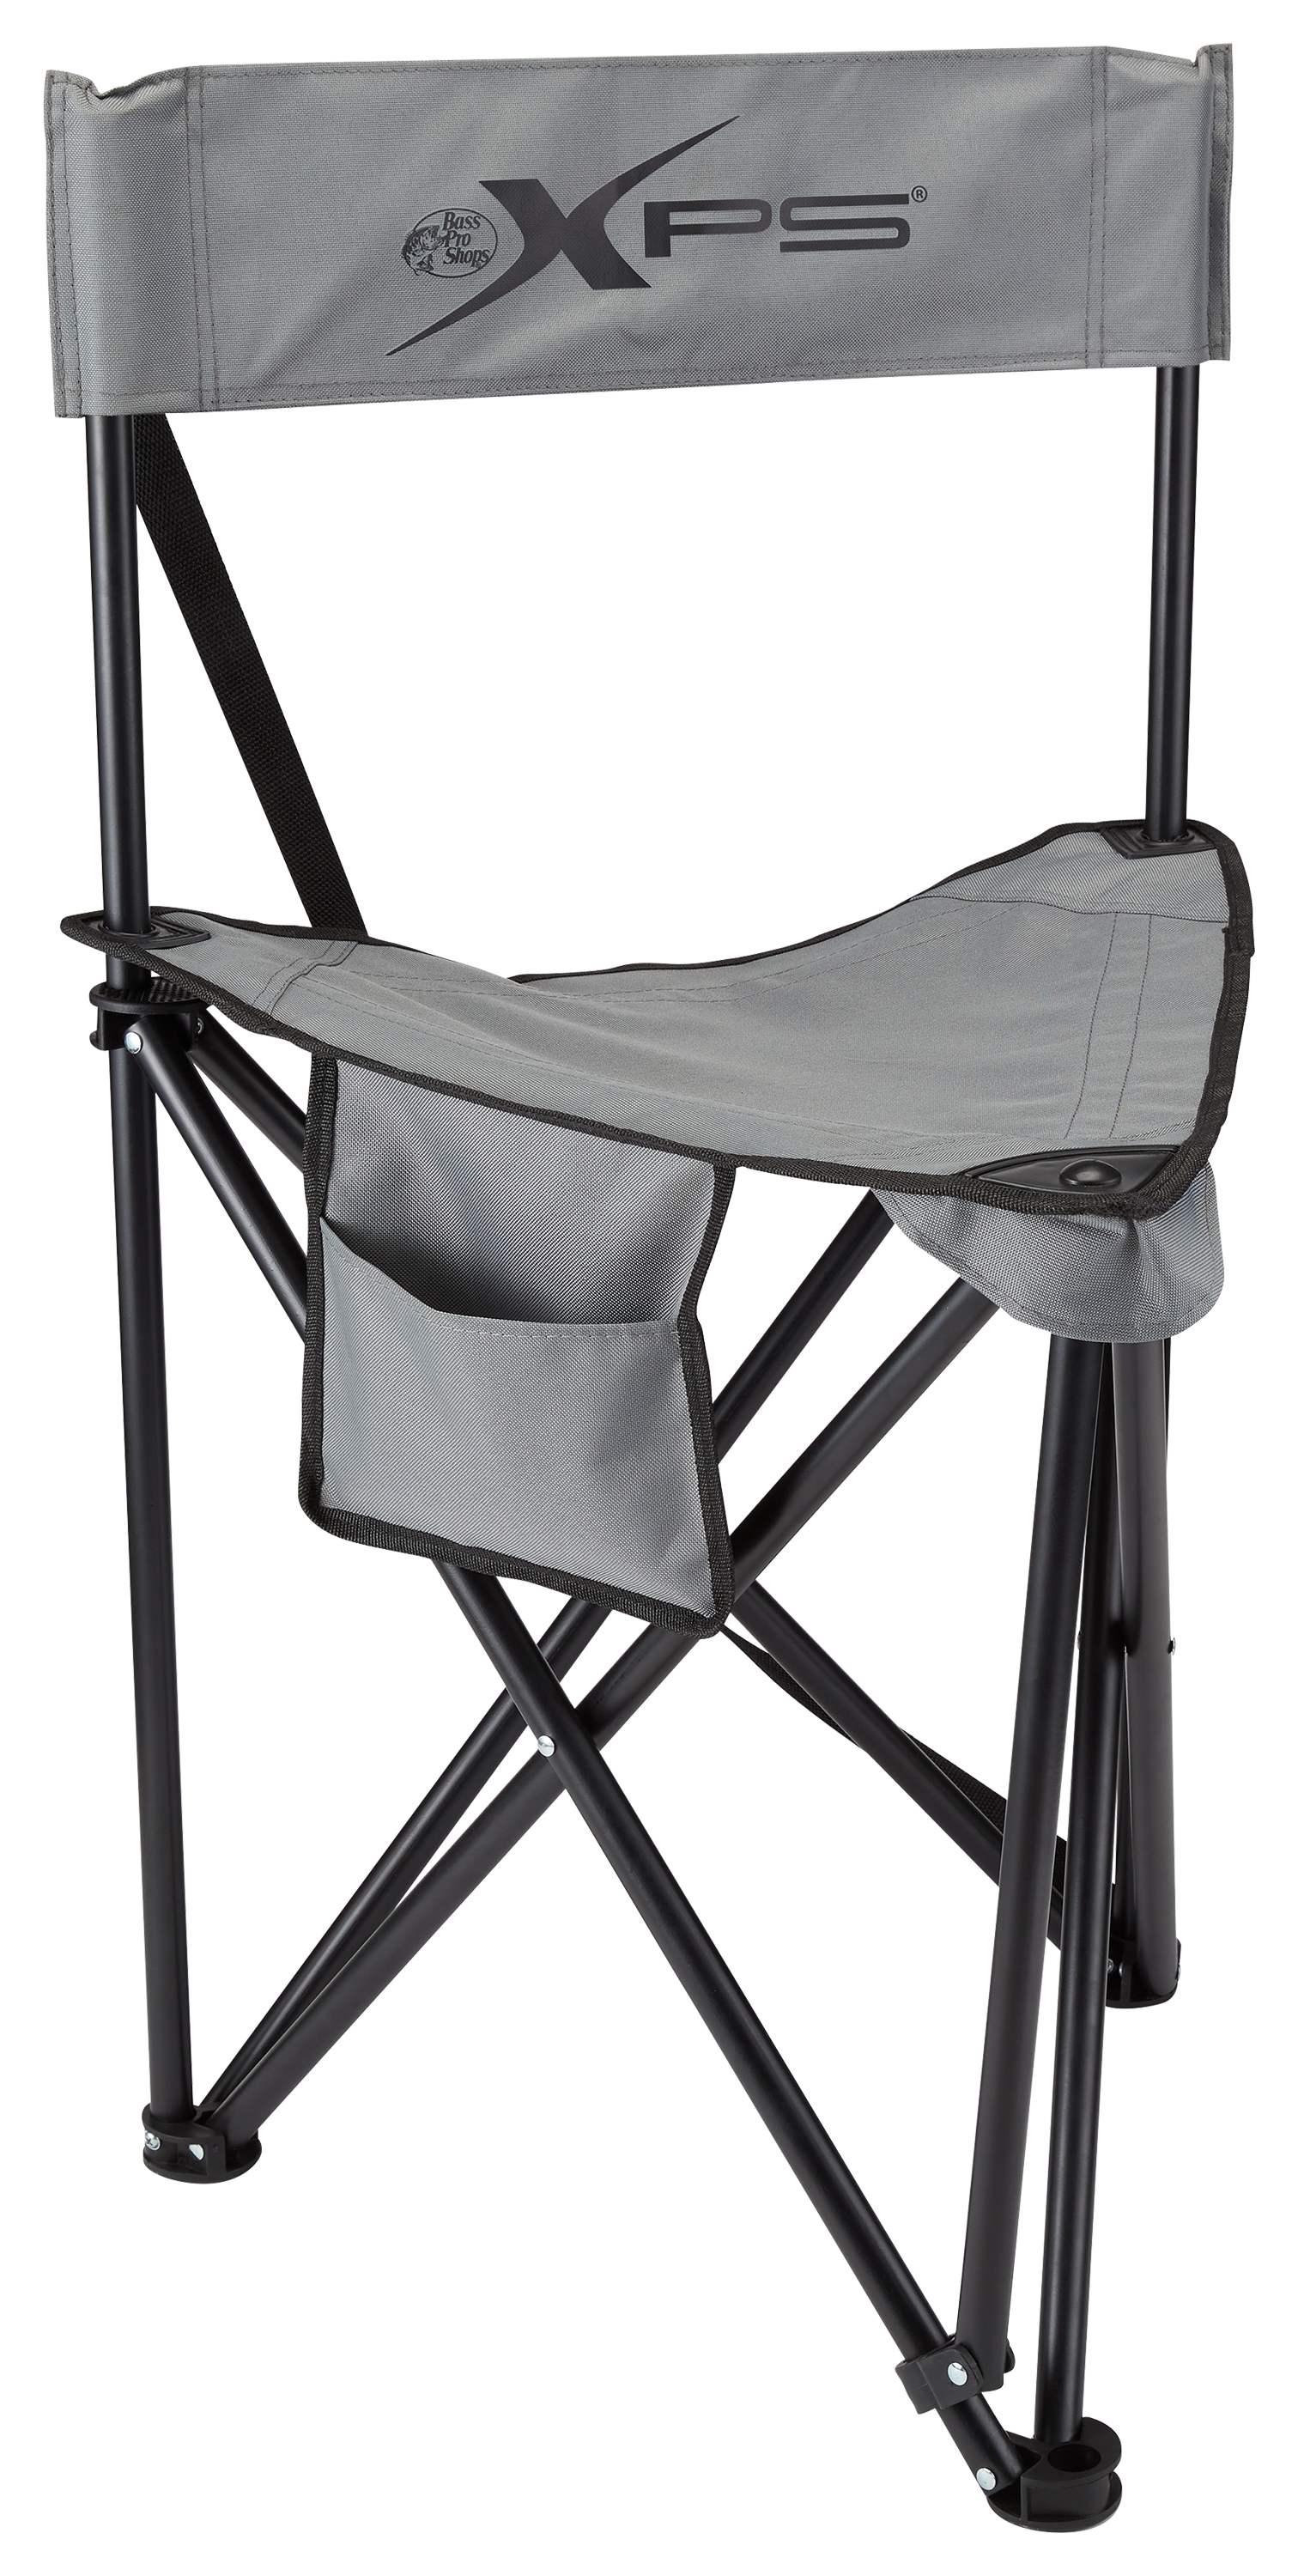 Bass Pro Shops XPS Magnum Folding Ice Fishing Chair